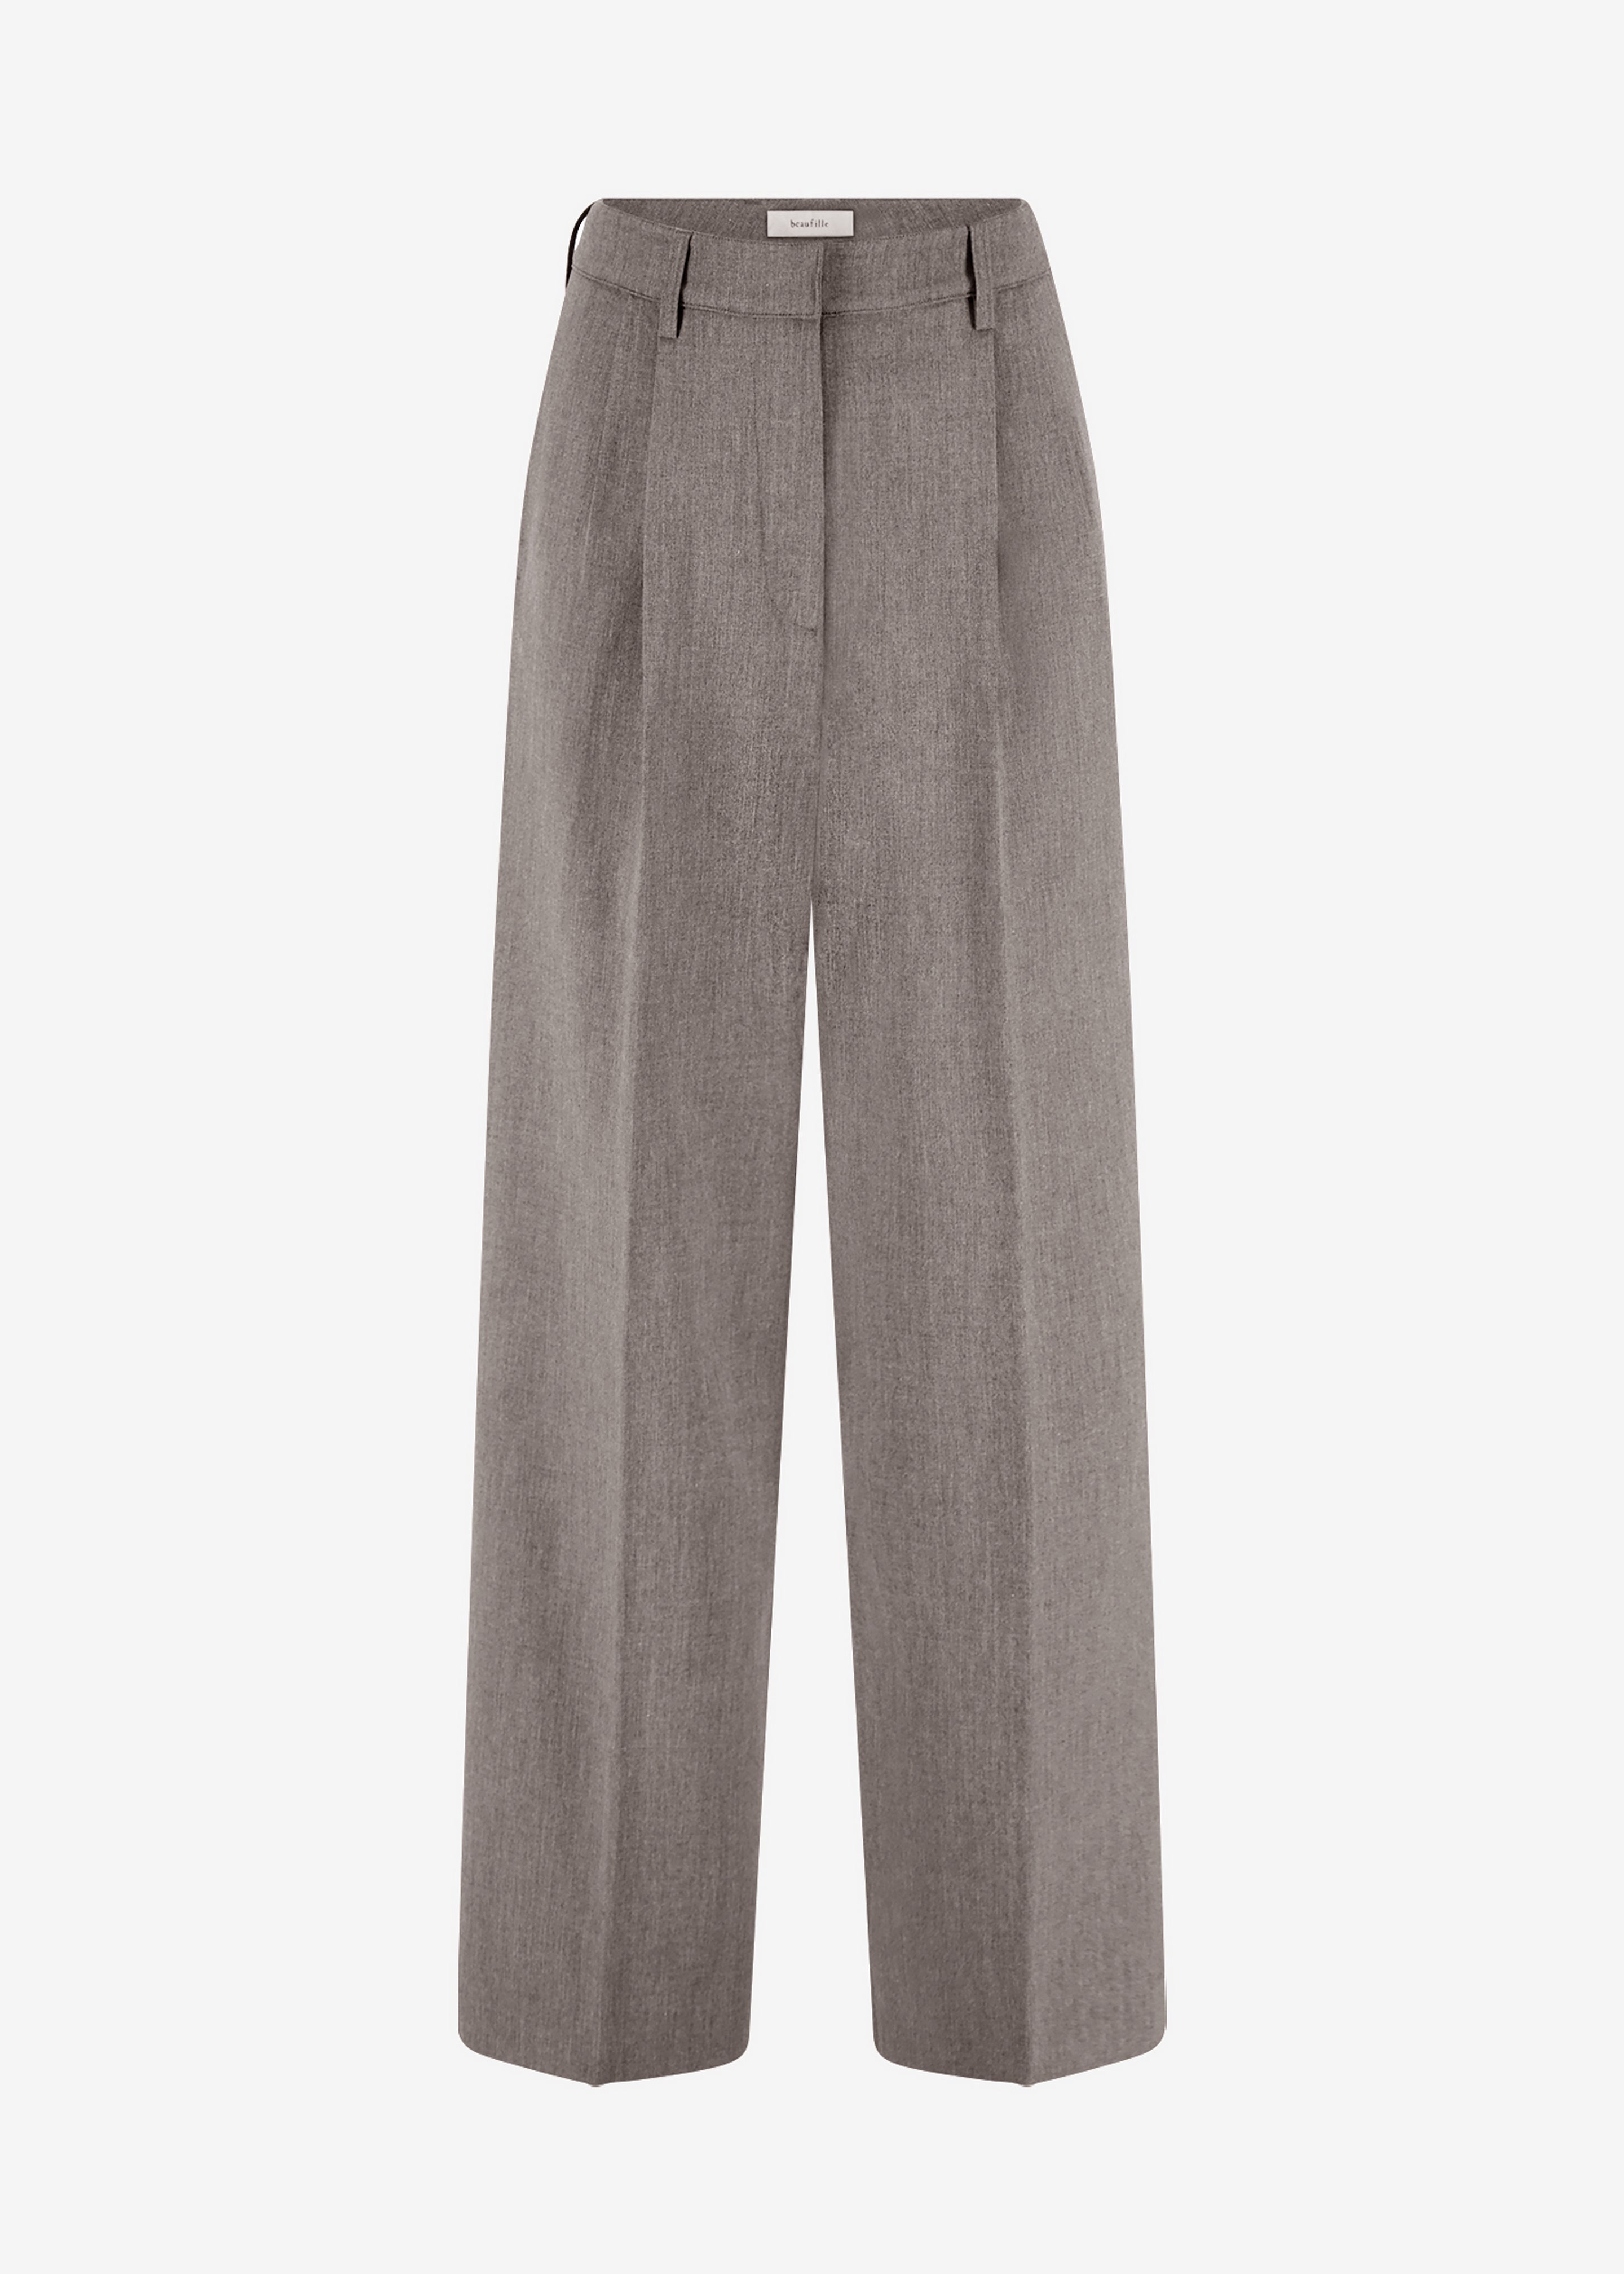 Beaufille Celeste Trousers - Heather Brown - 8